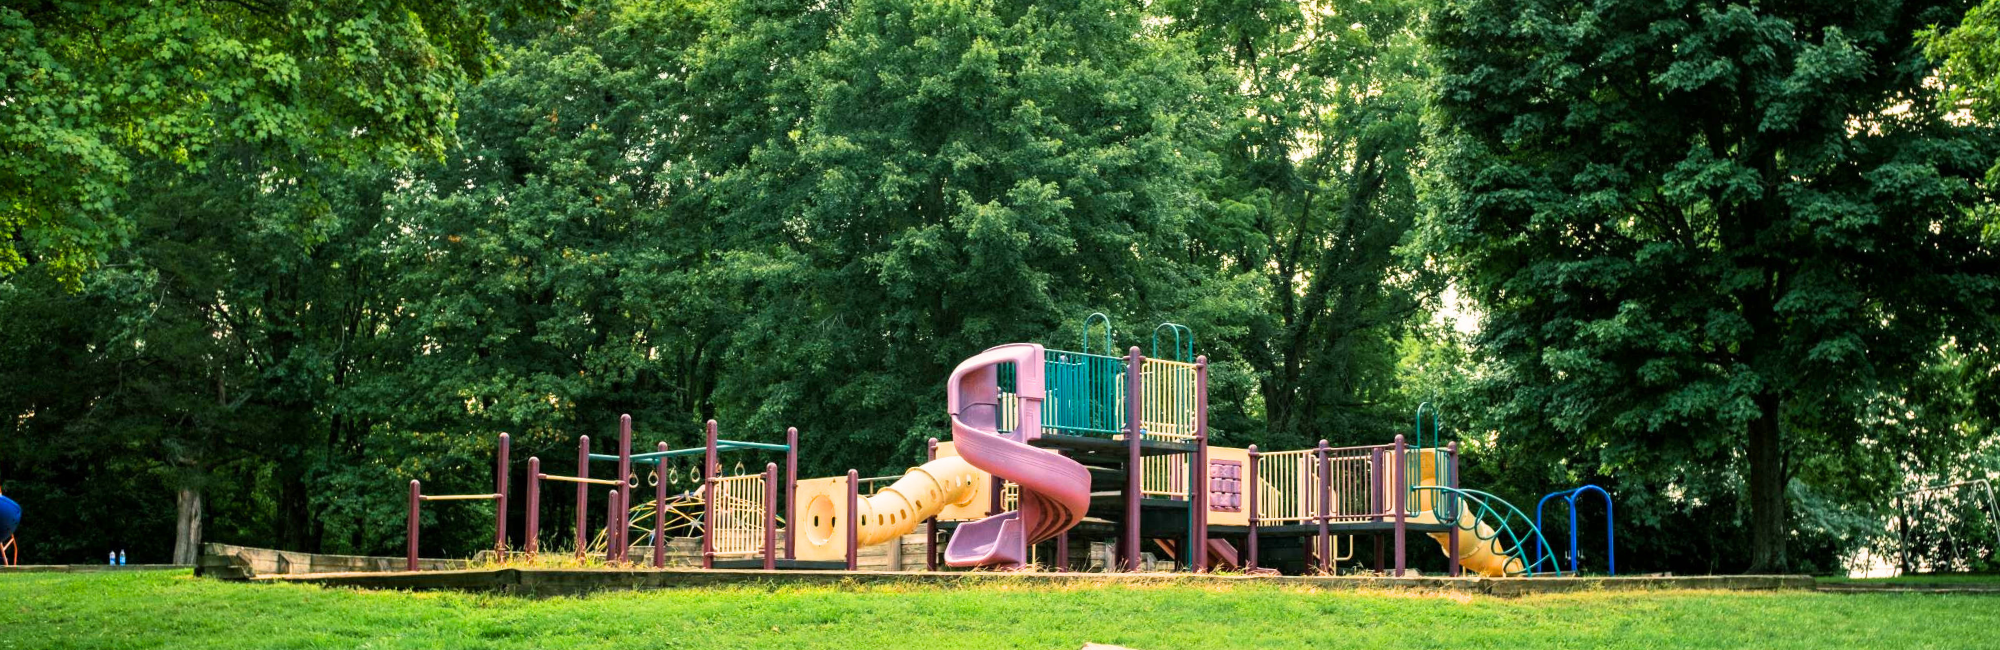 park with a playground, greenspace, and trees